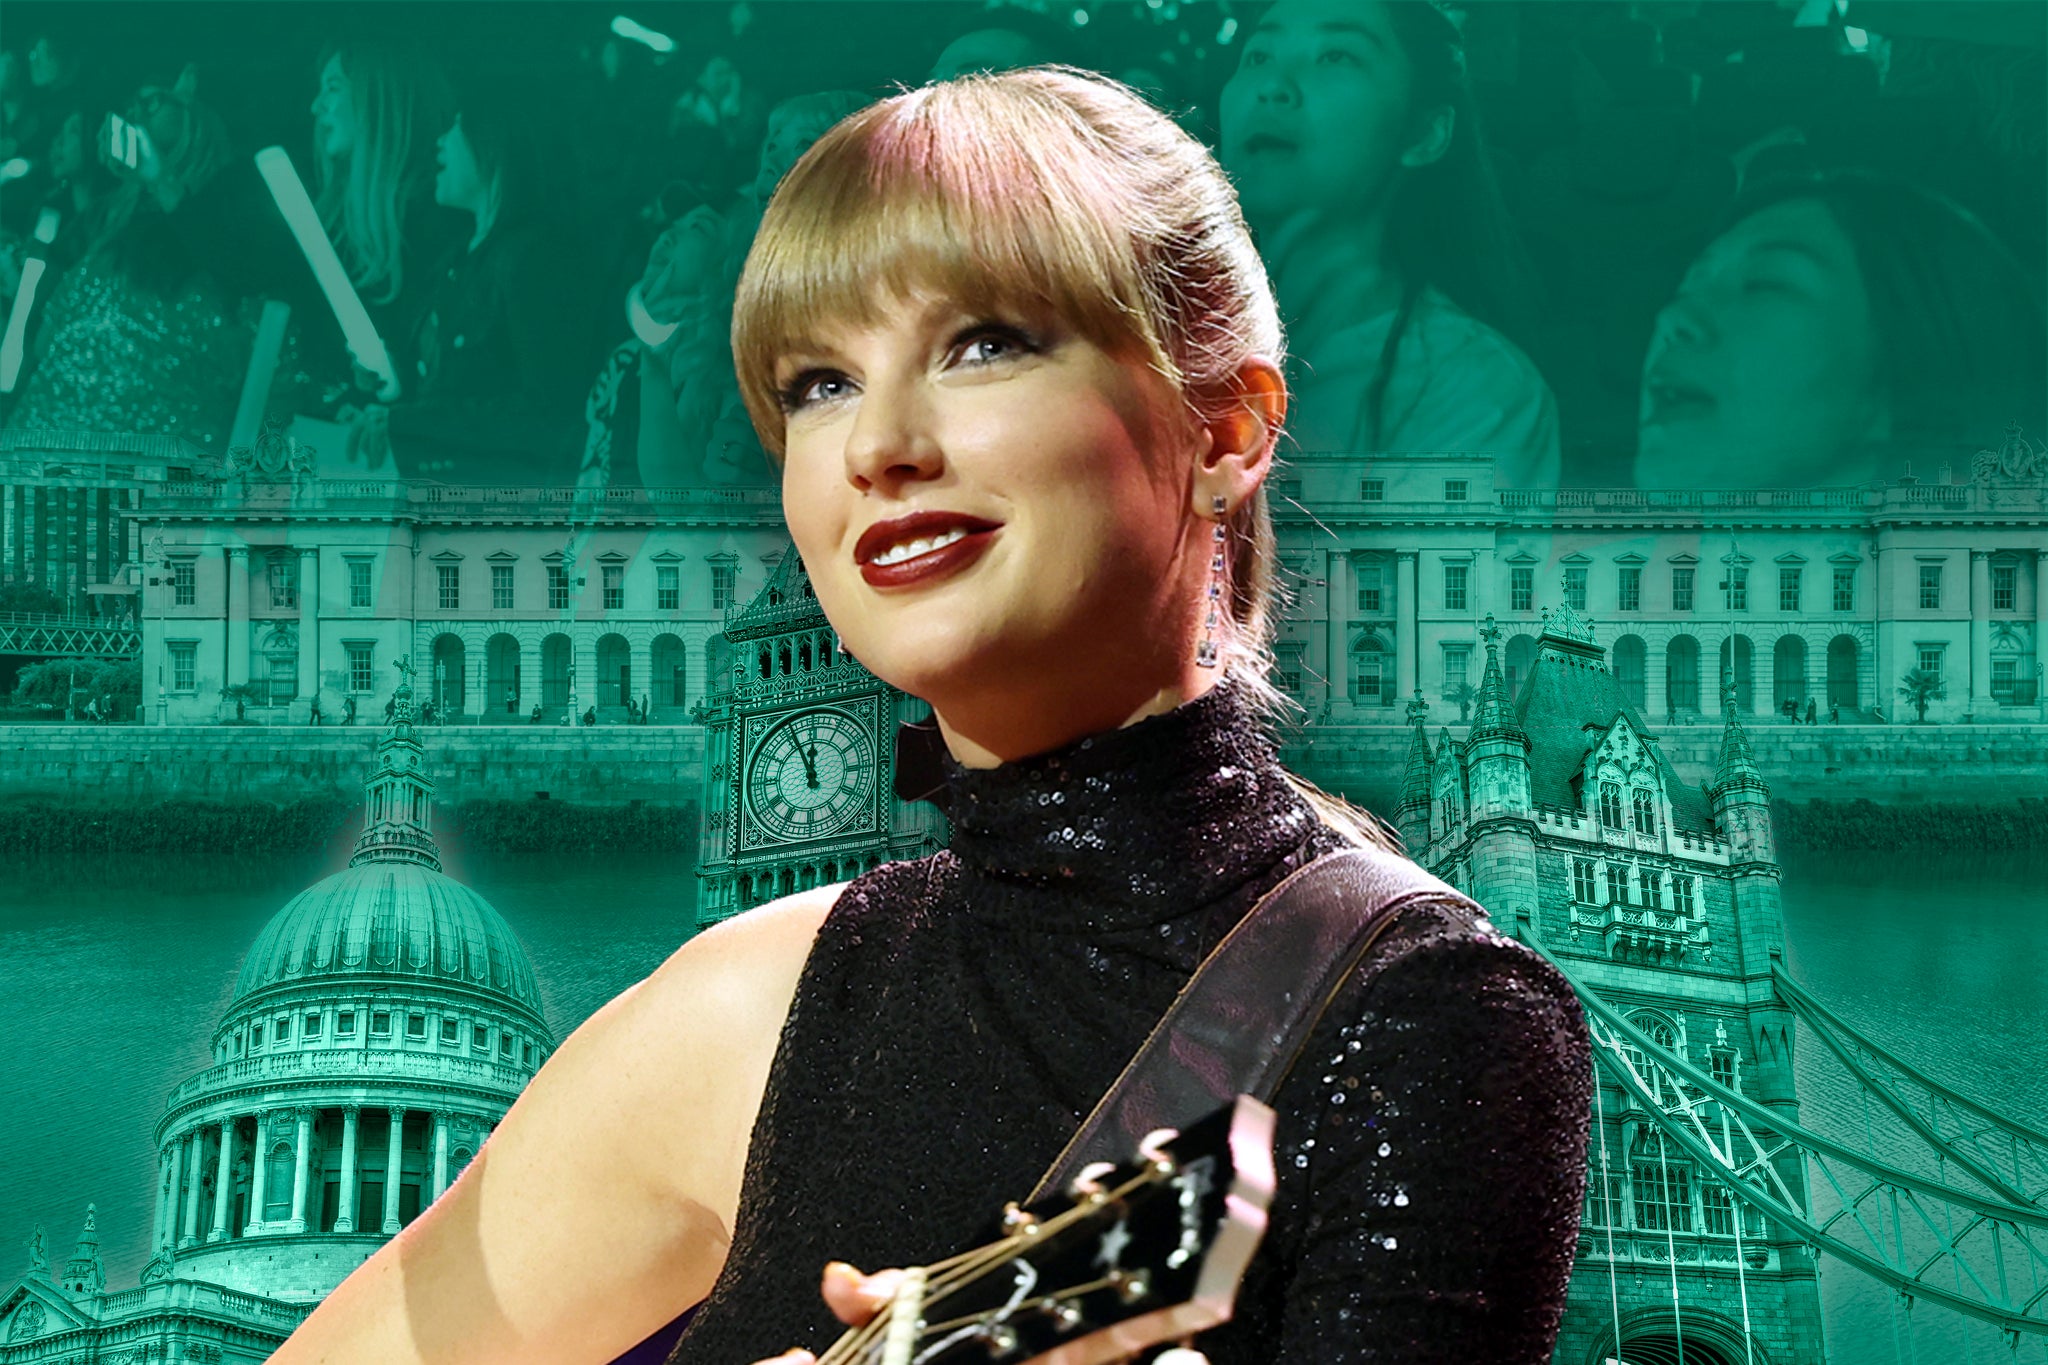 Swift’s tour has helped create a surge in spending in each city her tour stops in